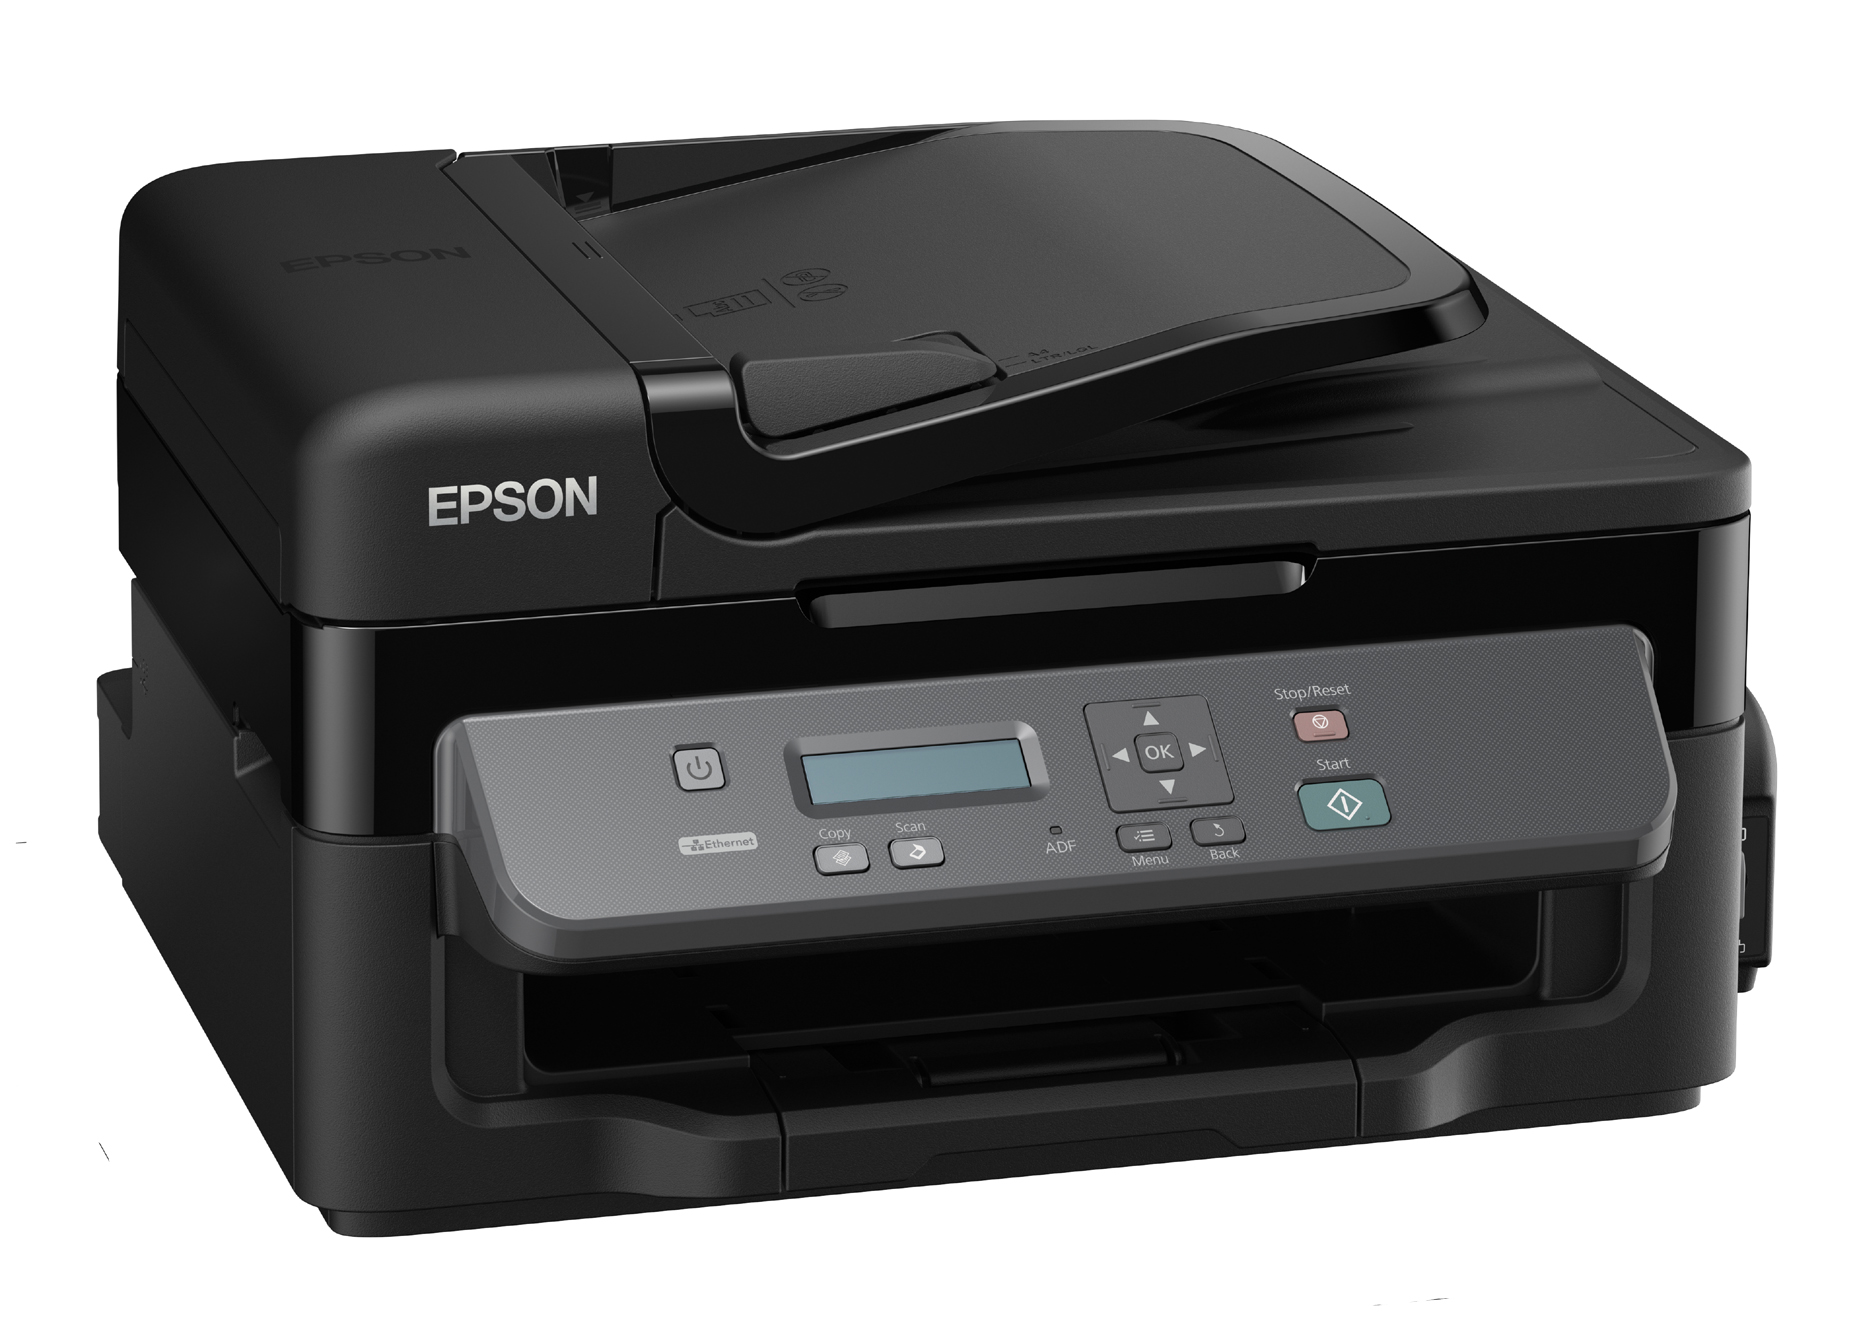 Epson Workforce M200 The Epson Workforce M200 Is An All In One Monochrome Integrated Ink Tank 4595